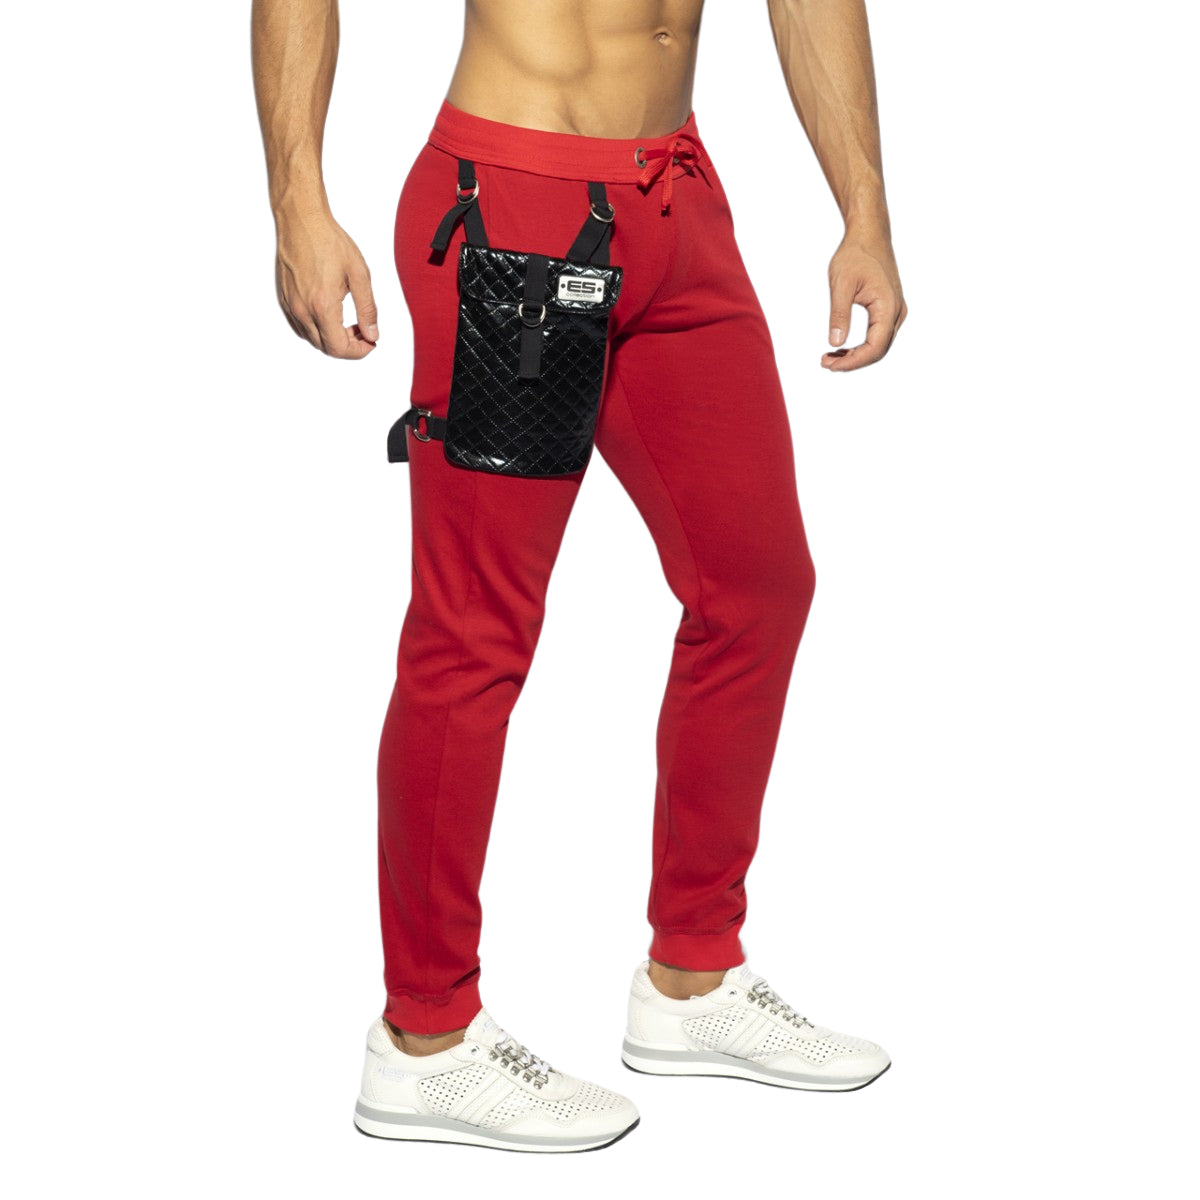 ES Collection Removable Pocket Sports Pants Red SP285